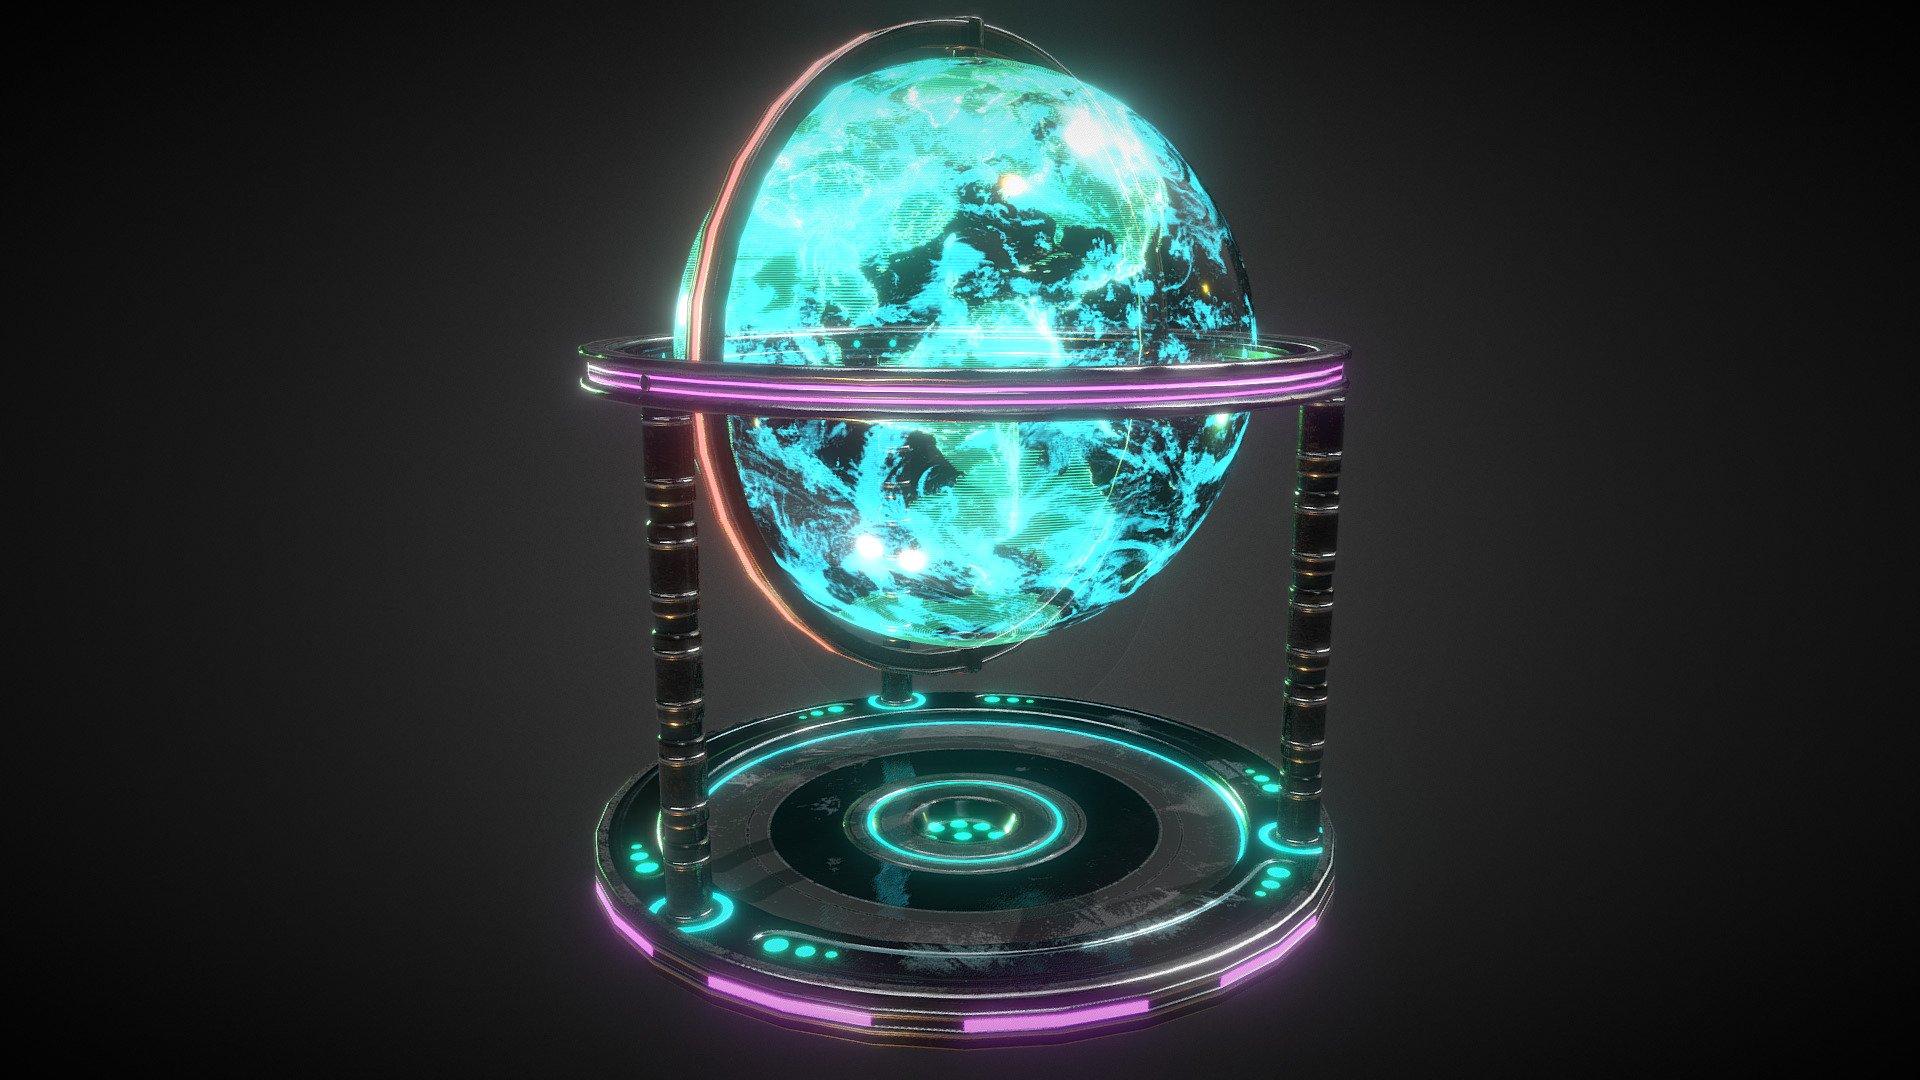 Modeled and unwrapped by Dark-Minaz.  Textured by HH3D.

Based on &ldquo;Globe (Texturing Contest)